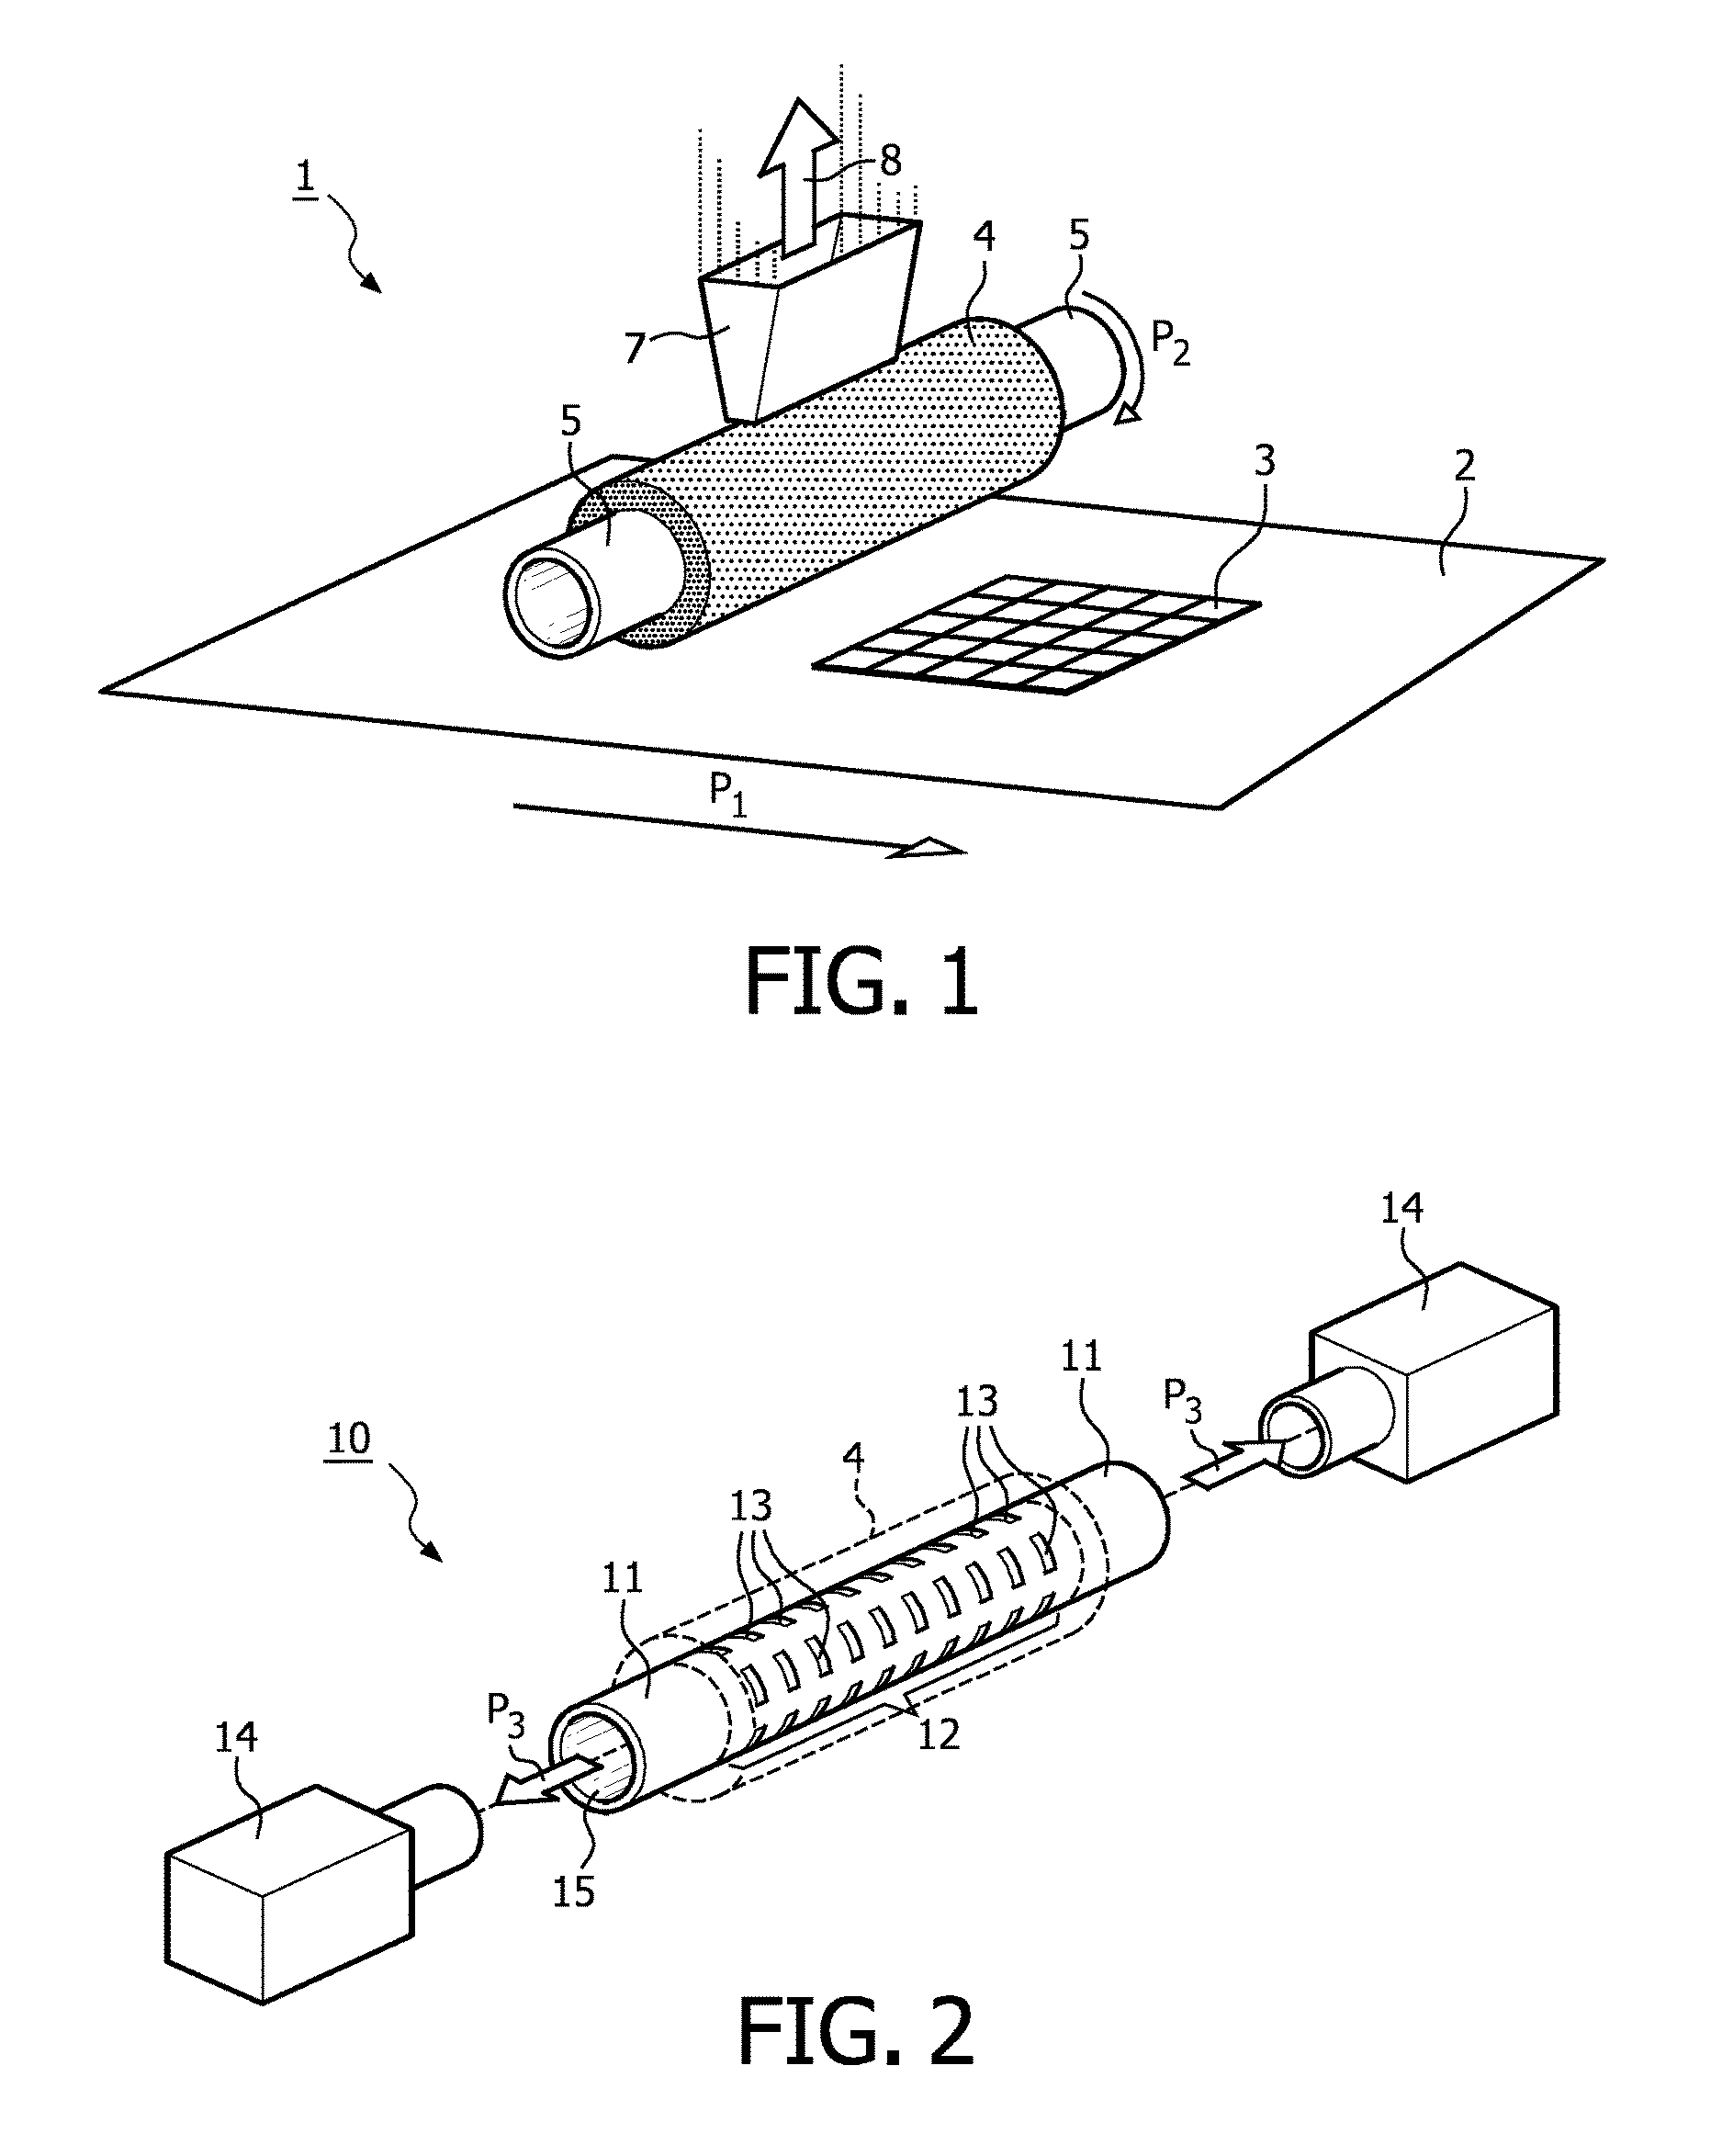 Device and method for drying separated electronic components